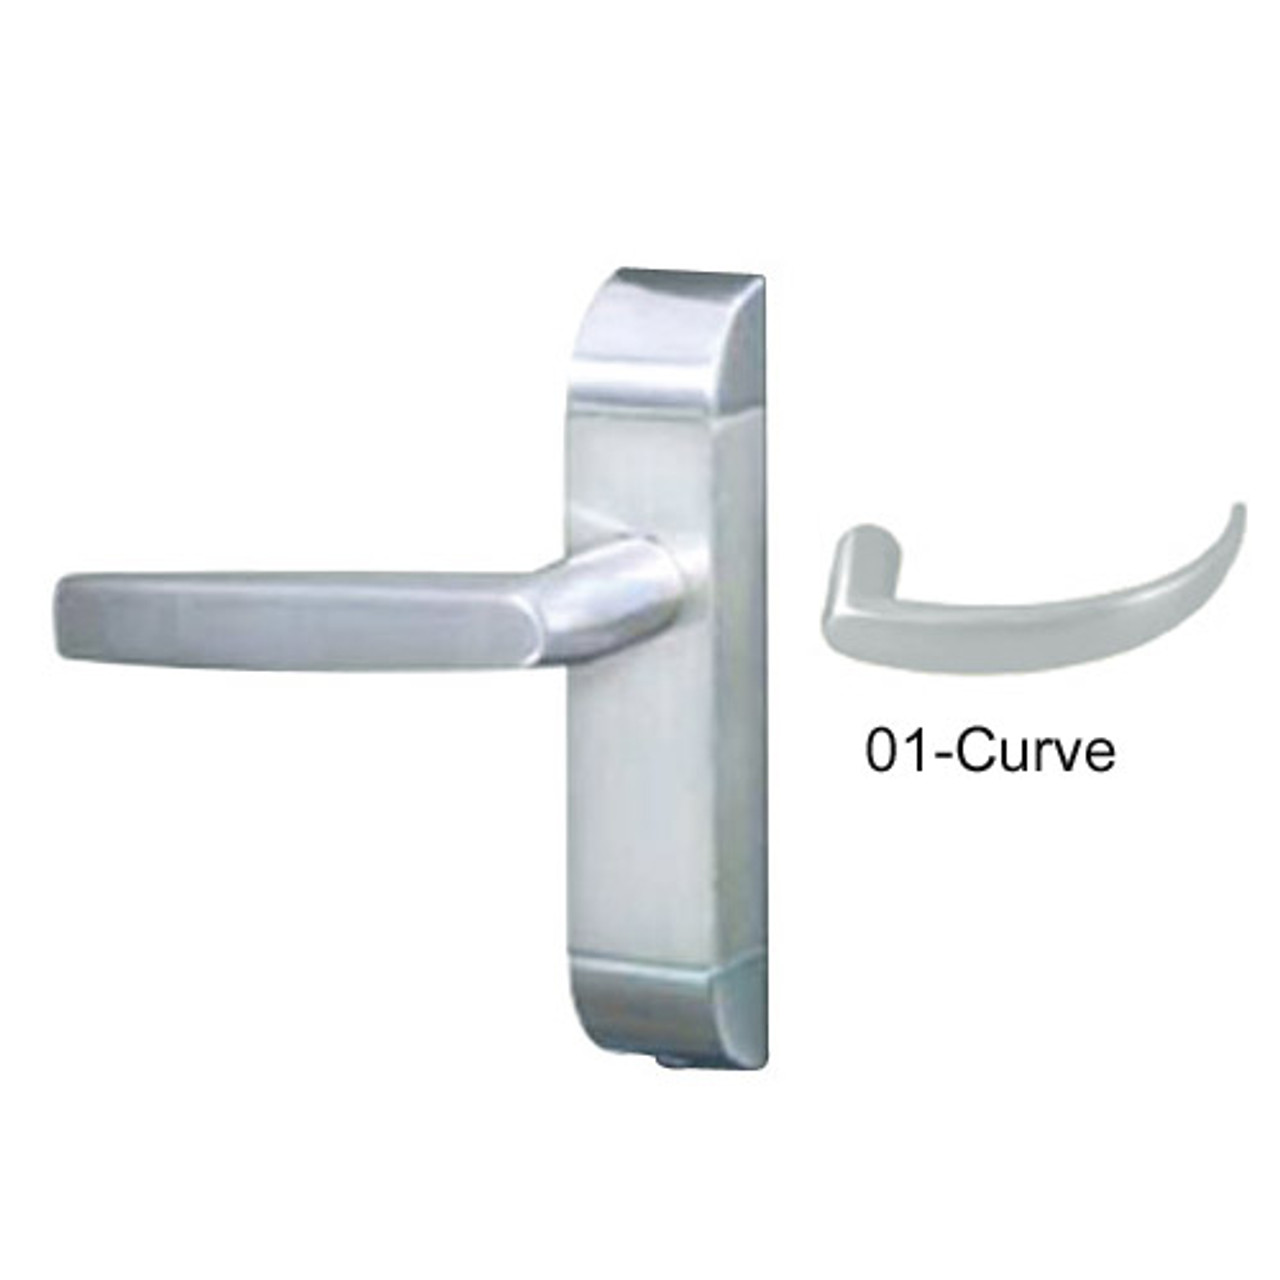 4600-01-541-US32 Adams Rite Heavy Duty Curve Deadlatch Handles in Bright Stainless Finish